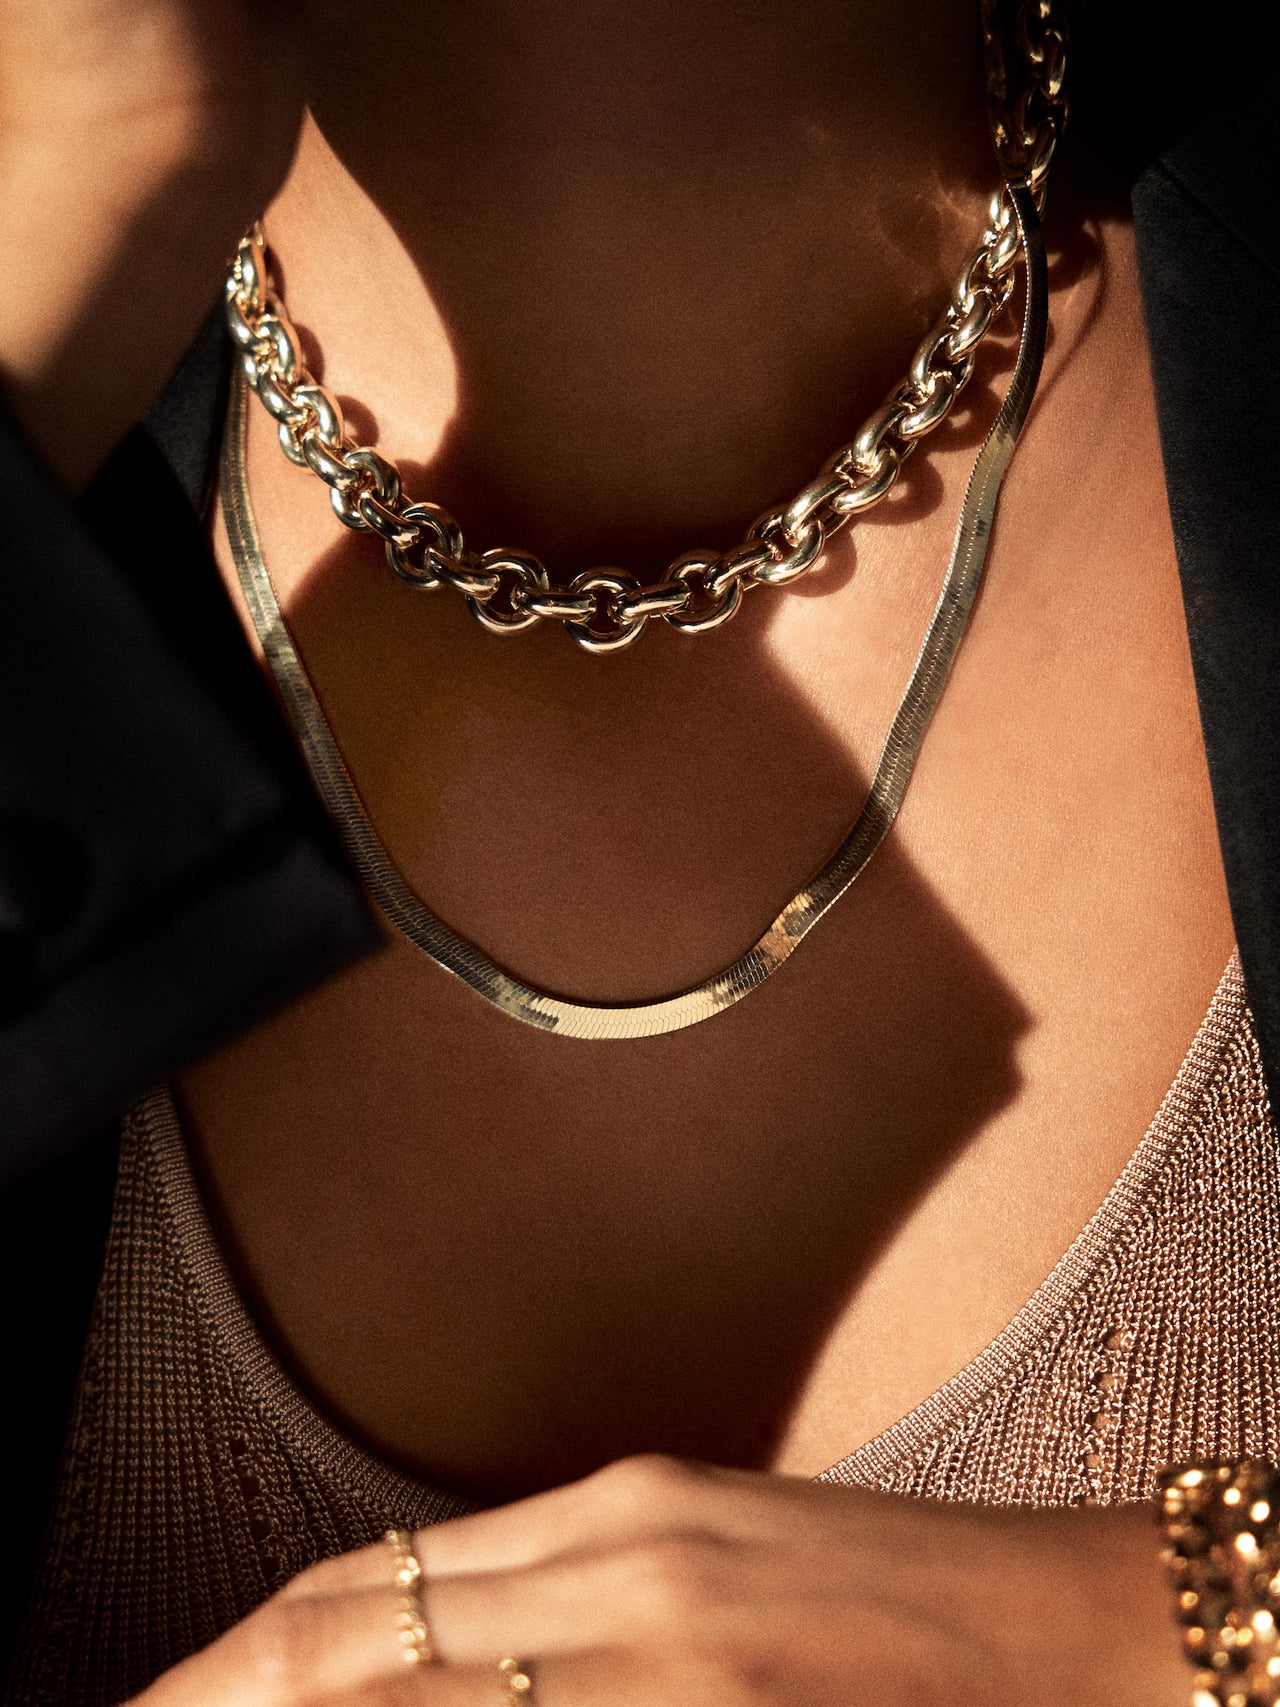 Euclid Necklace: Vermeil Hollow Link Chain pictured on models neck. Styled with the Vermeil Ultra Herringbone Necklace.